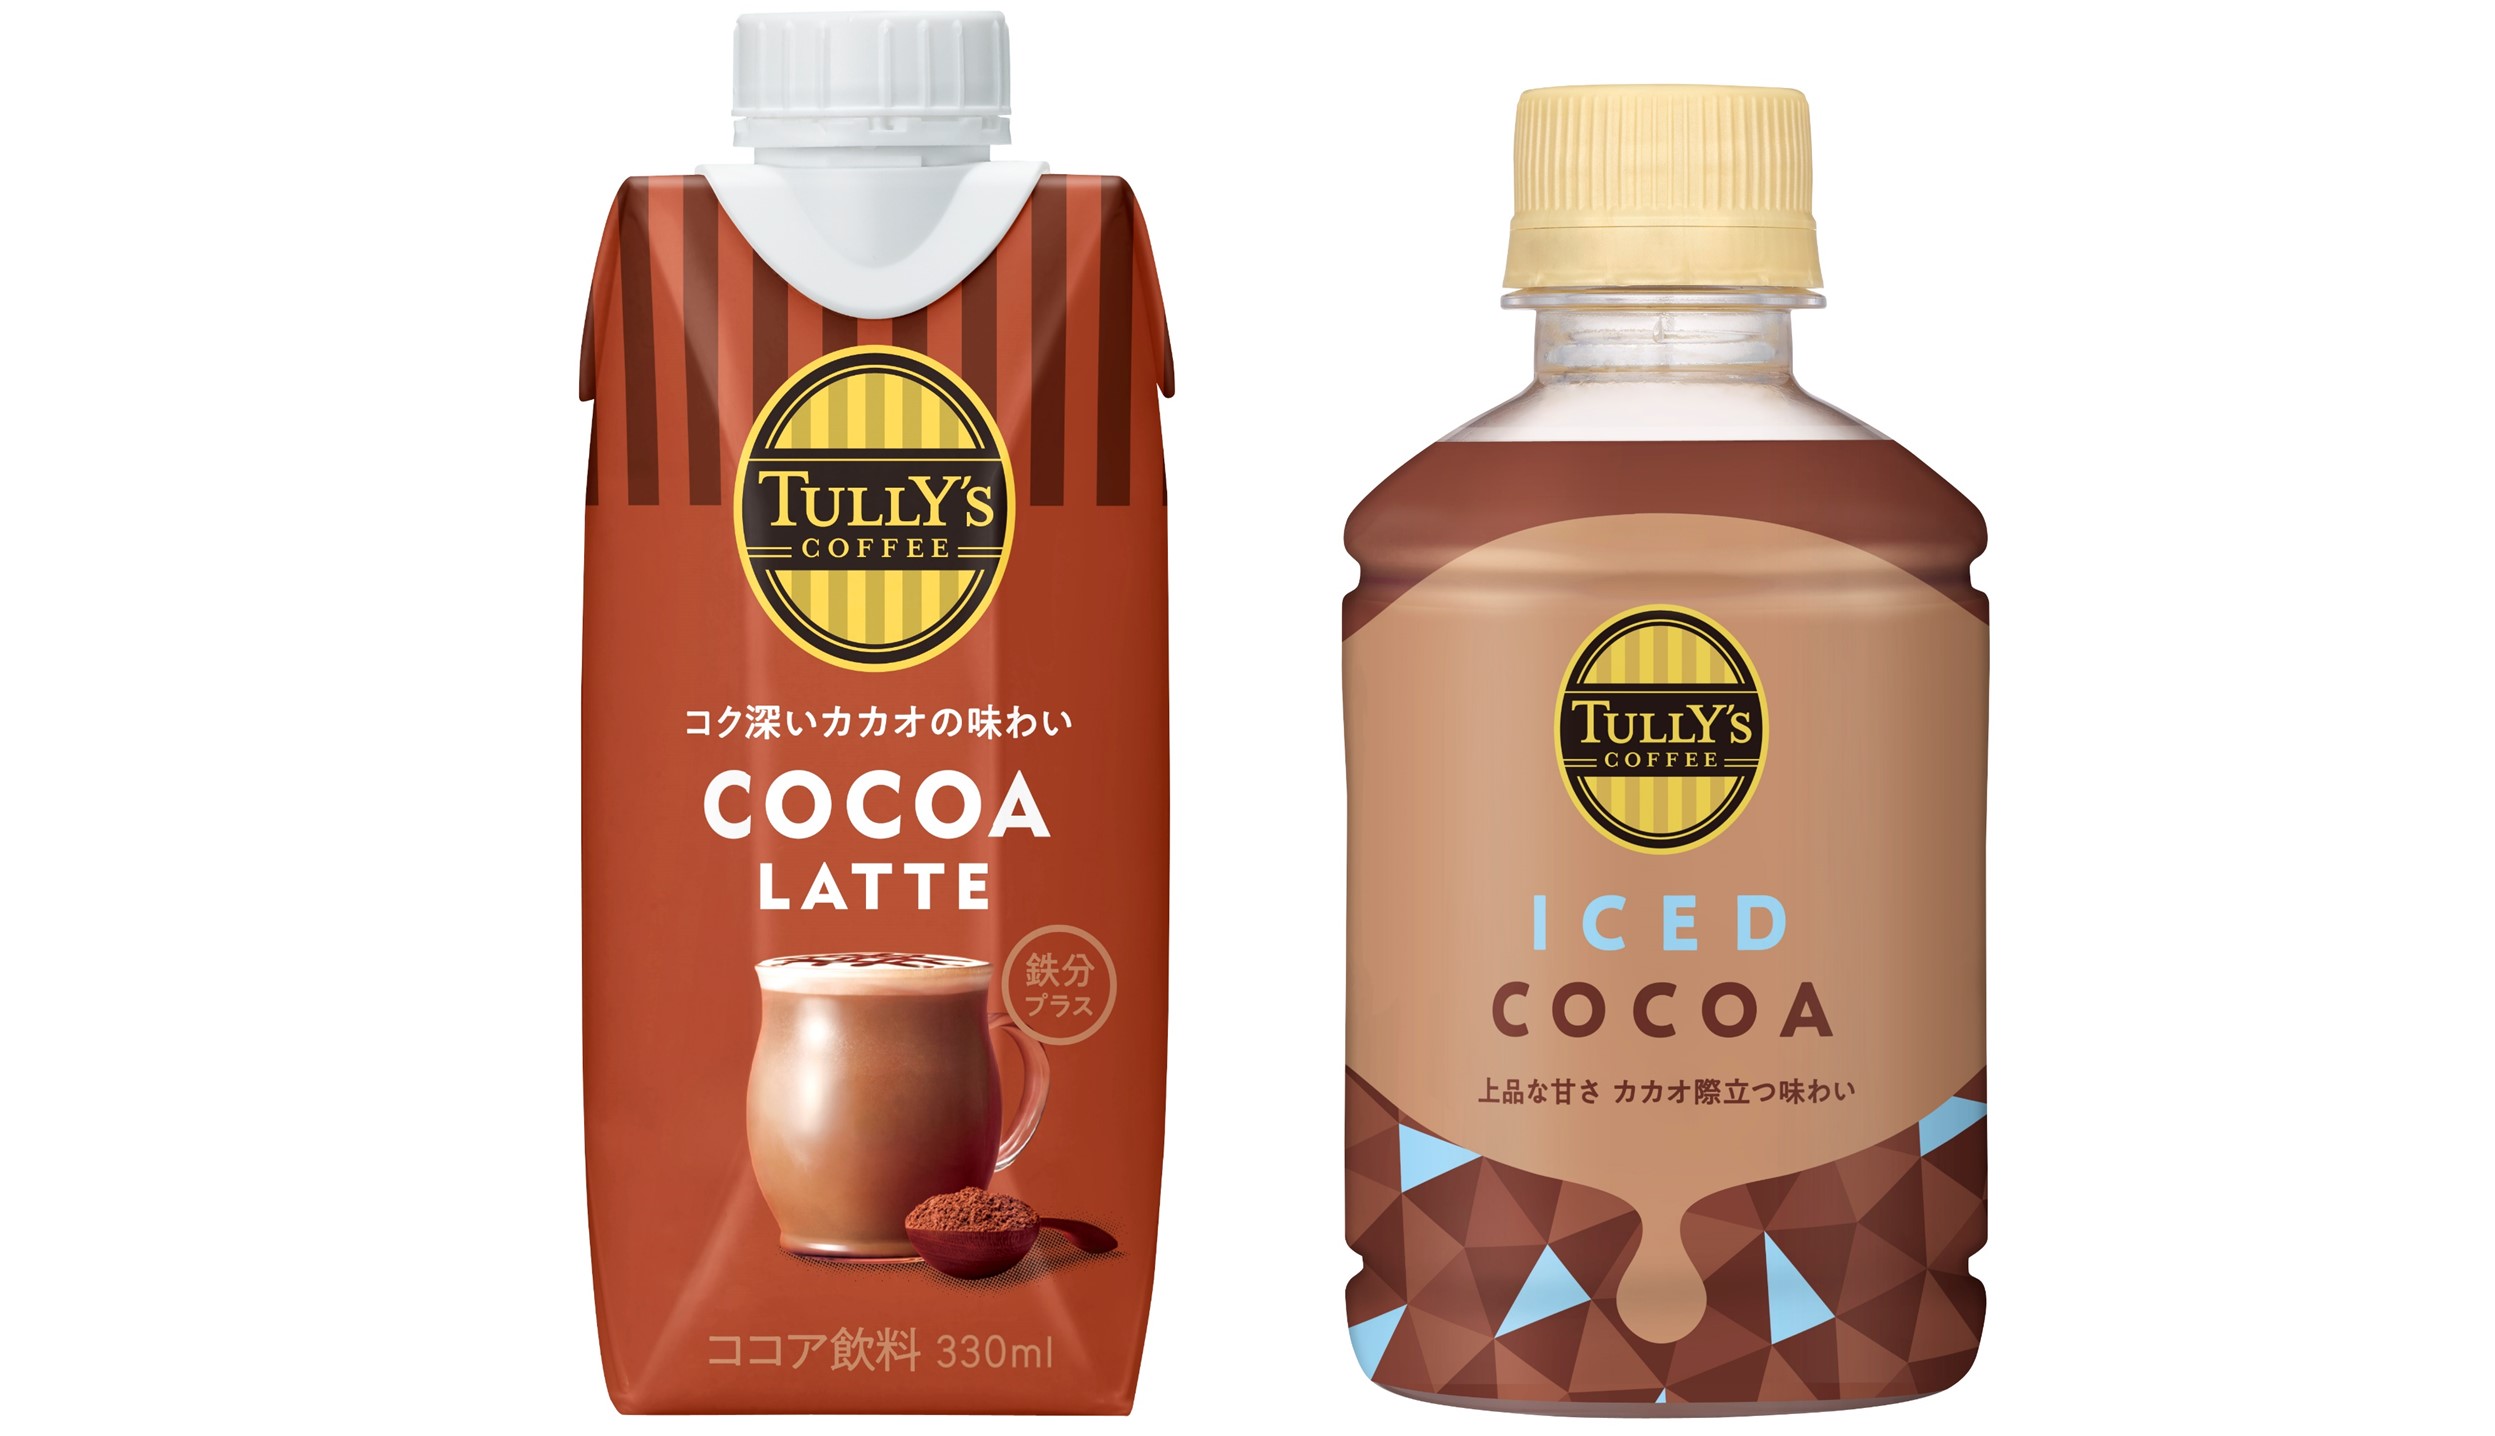 「TULLY'S COFFEE COCOA LATTE」「同 ICED COCOA」を、3月25日（月）に販売開始